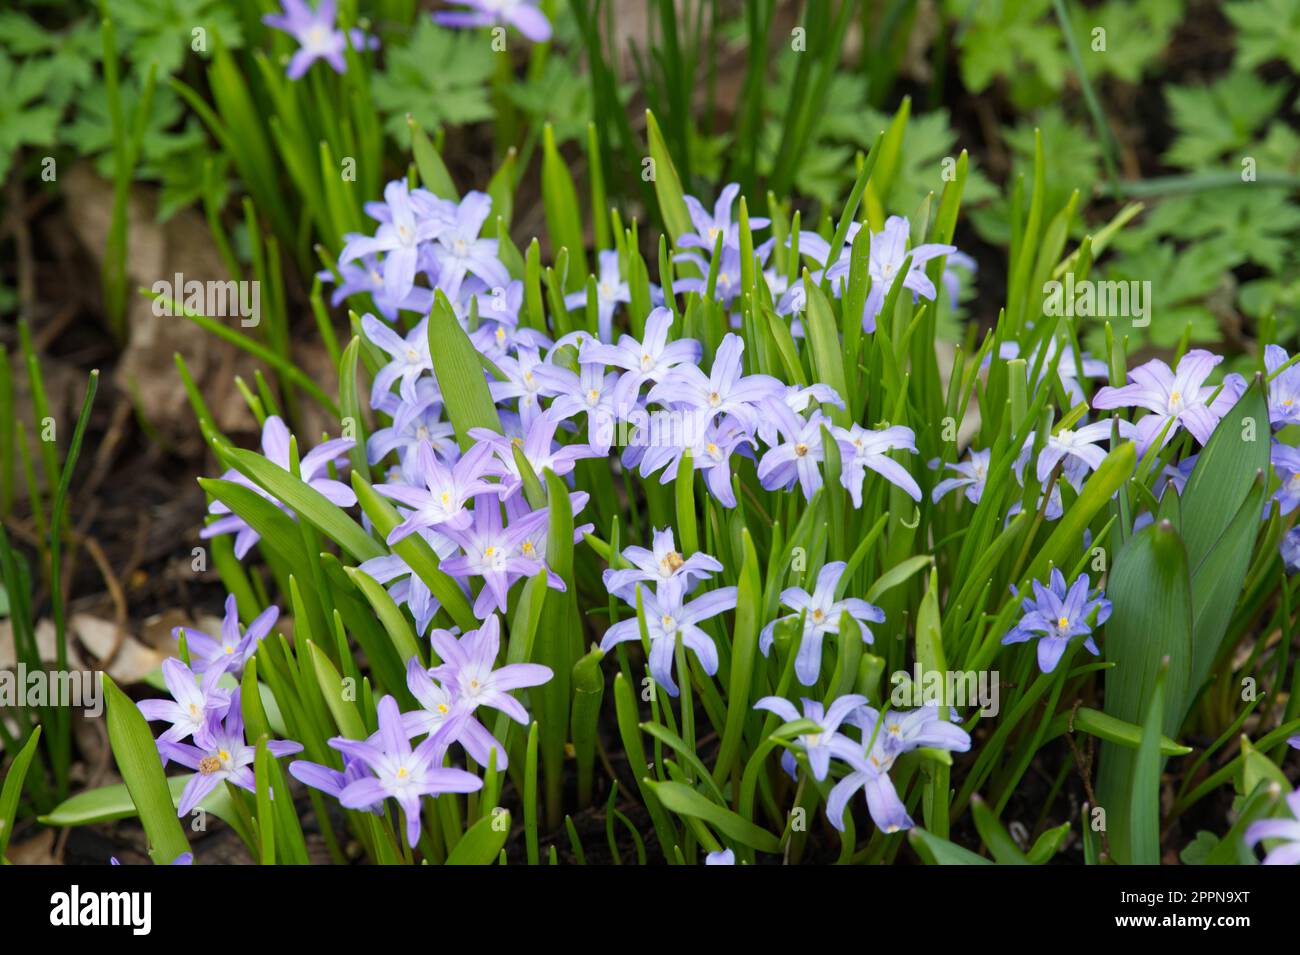 Lilac spring flowers of, Chionodoxa luciliae Violet Beauty in UK garden April Stock Photo